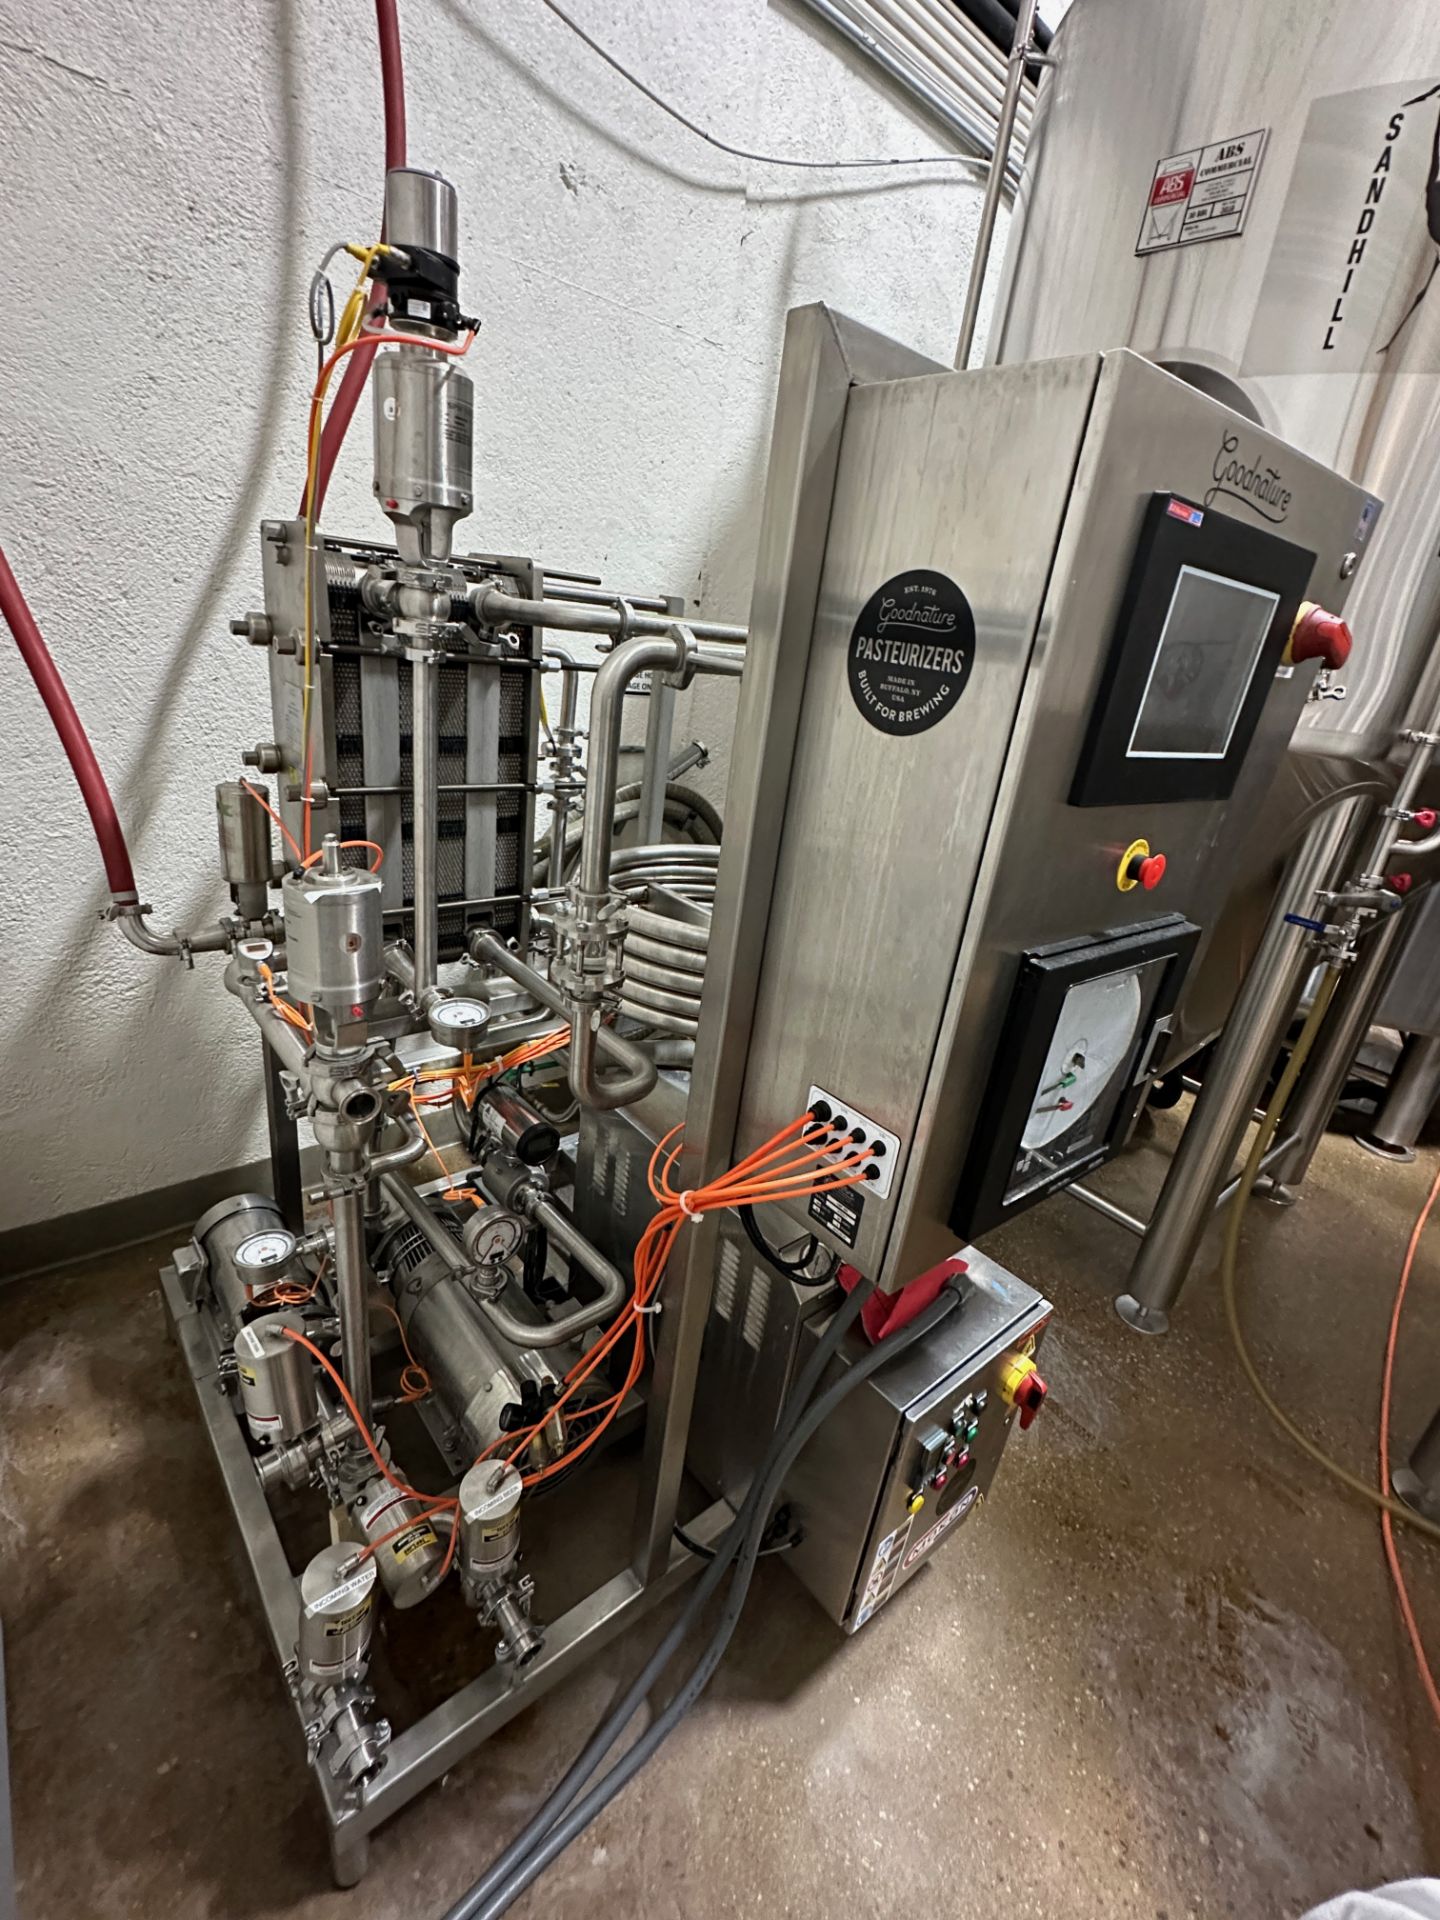 2019 Goodnature CBP 300 Pasteurizer Skid with Alfa Laval Heat Exchanger, Stainless | Rig Fee $350 - Image 5 of 5